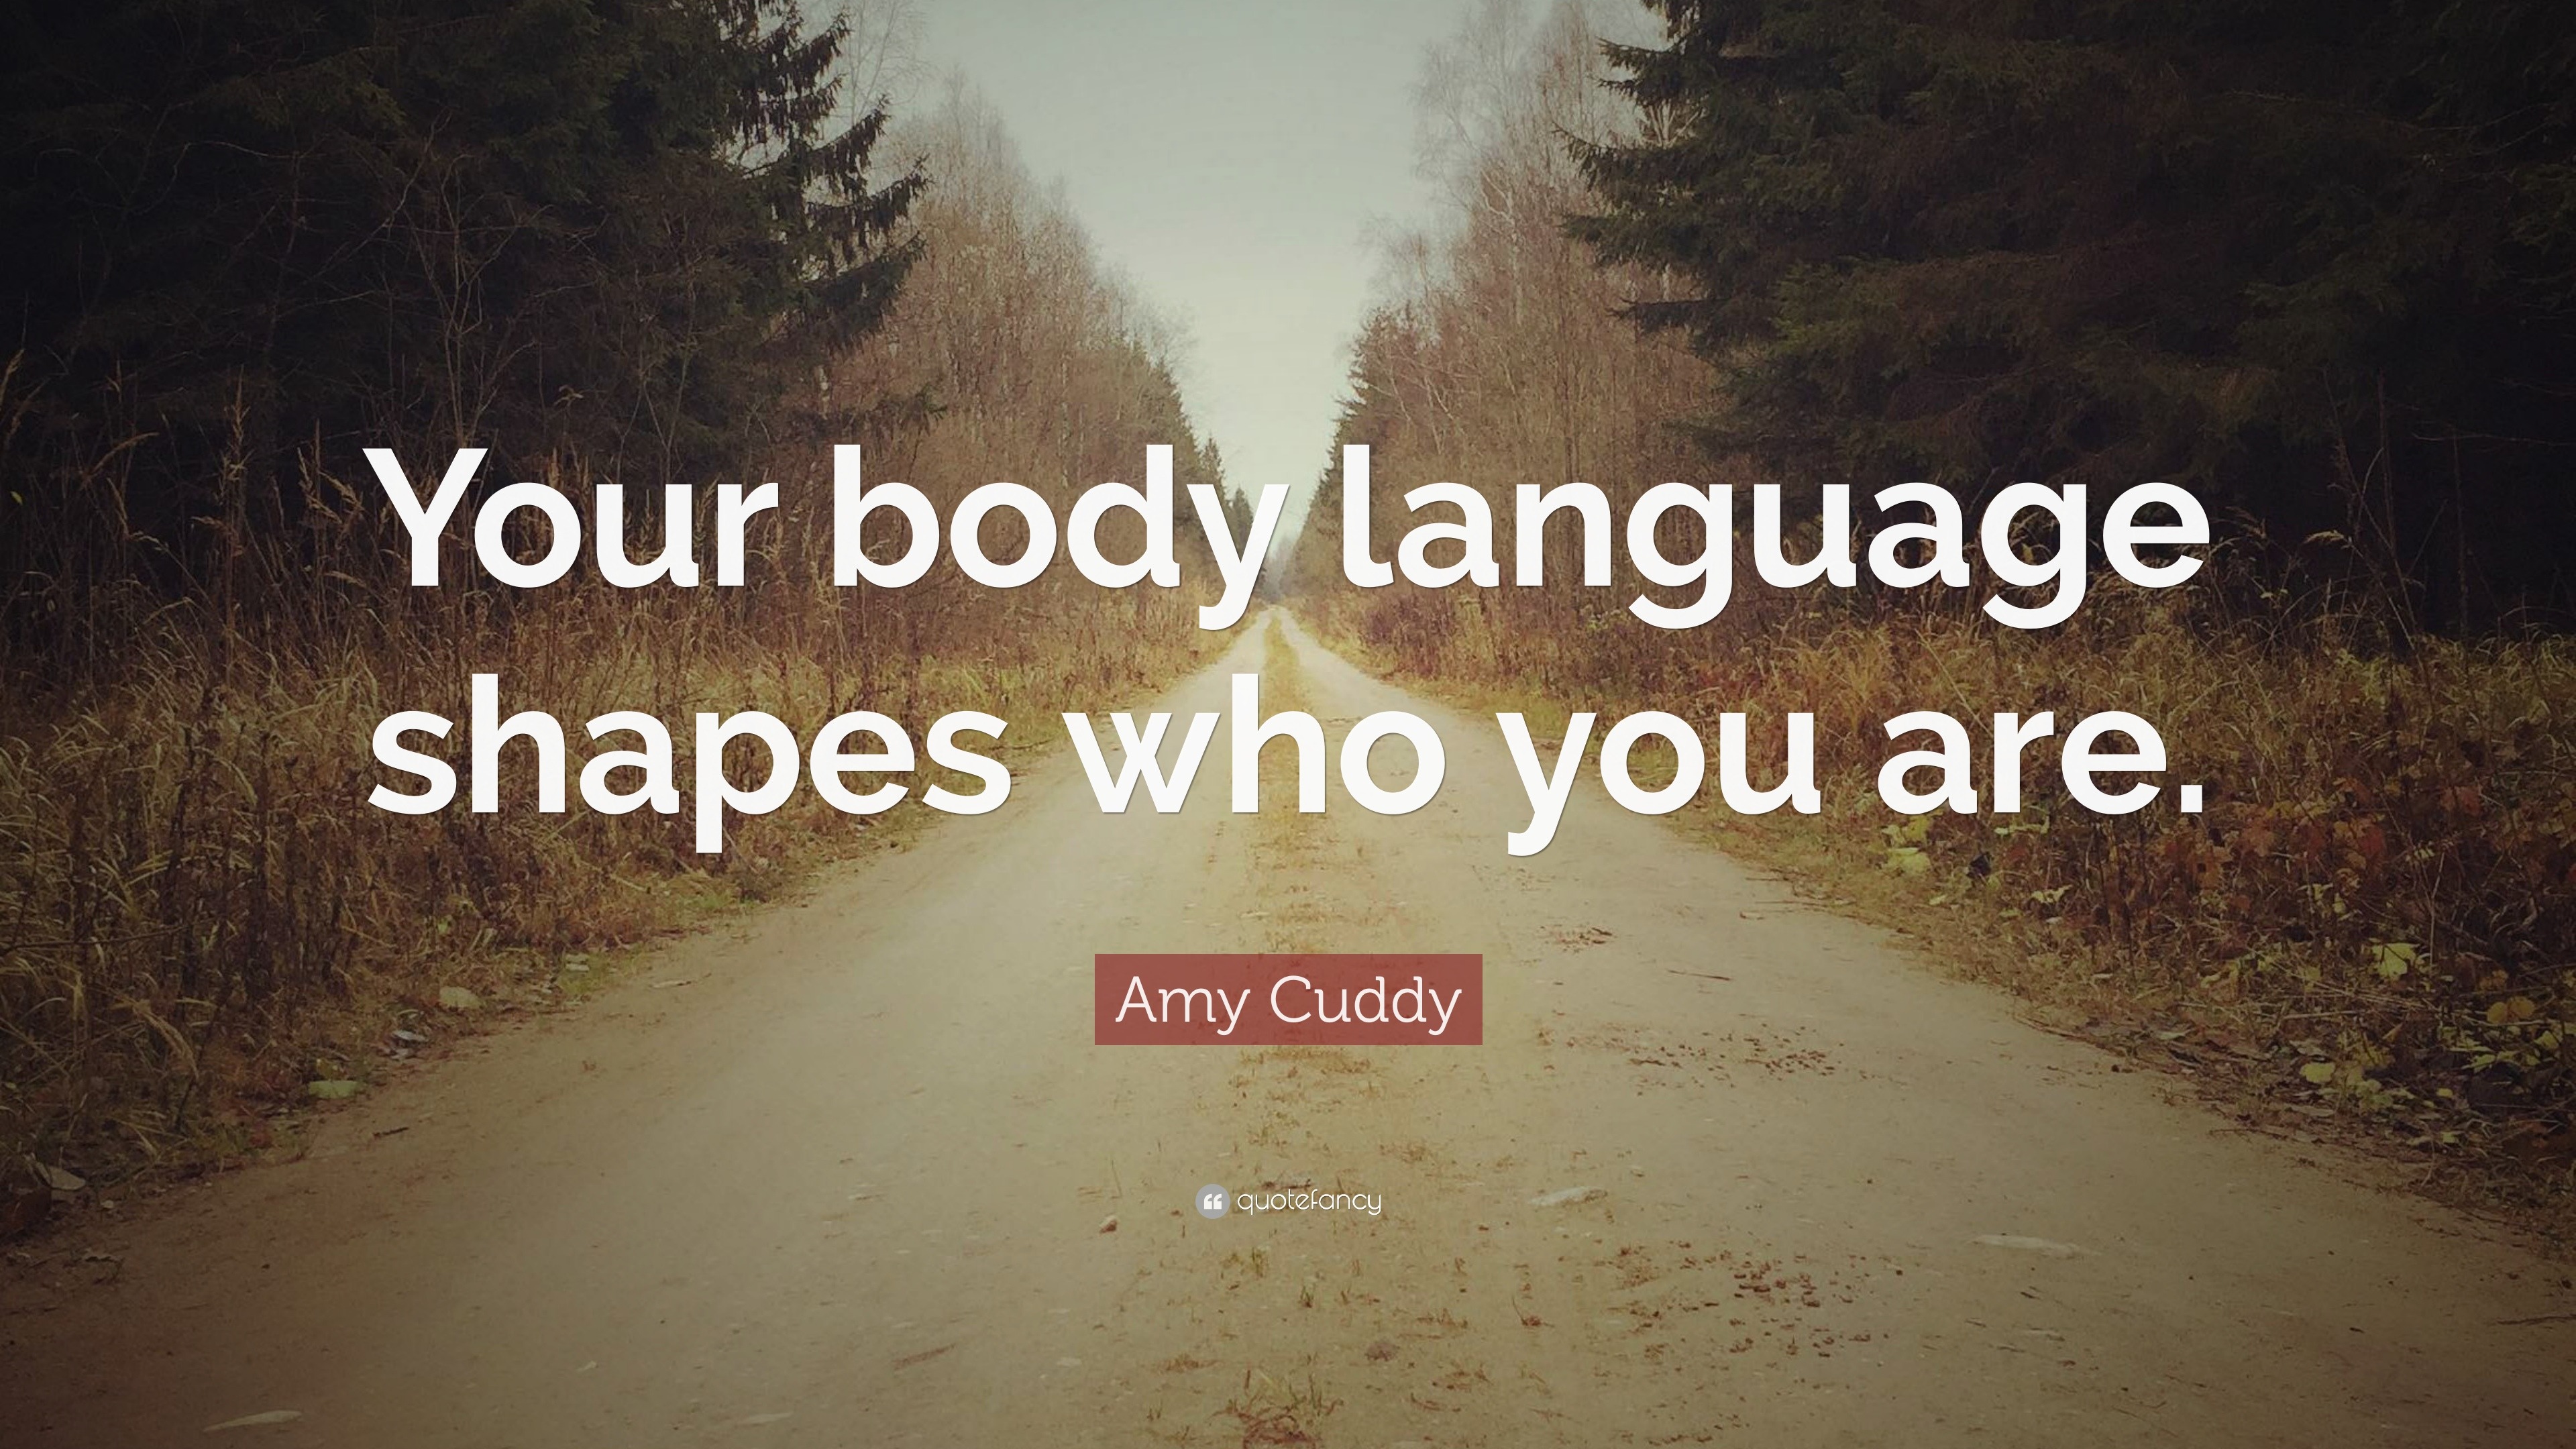 1512210 Amy Cuddy Quote Your body language shapes who you are